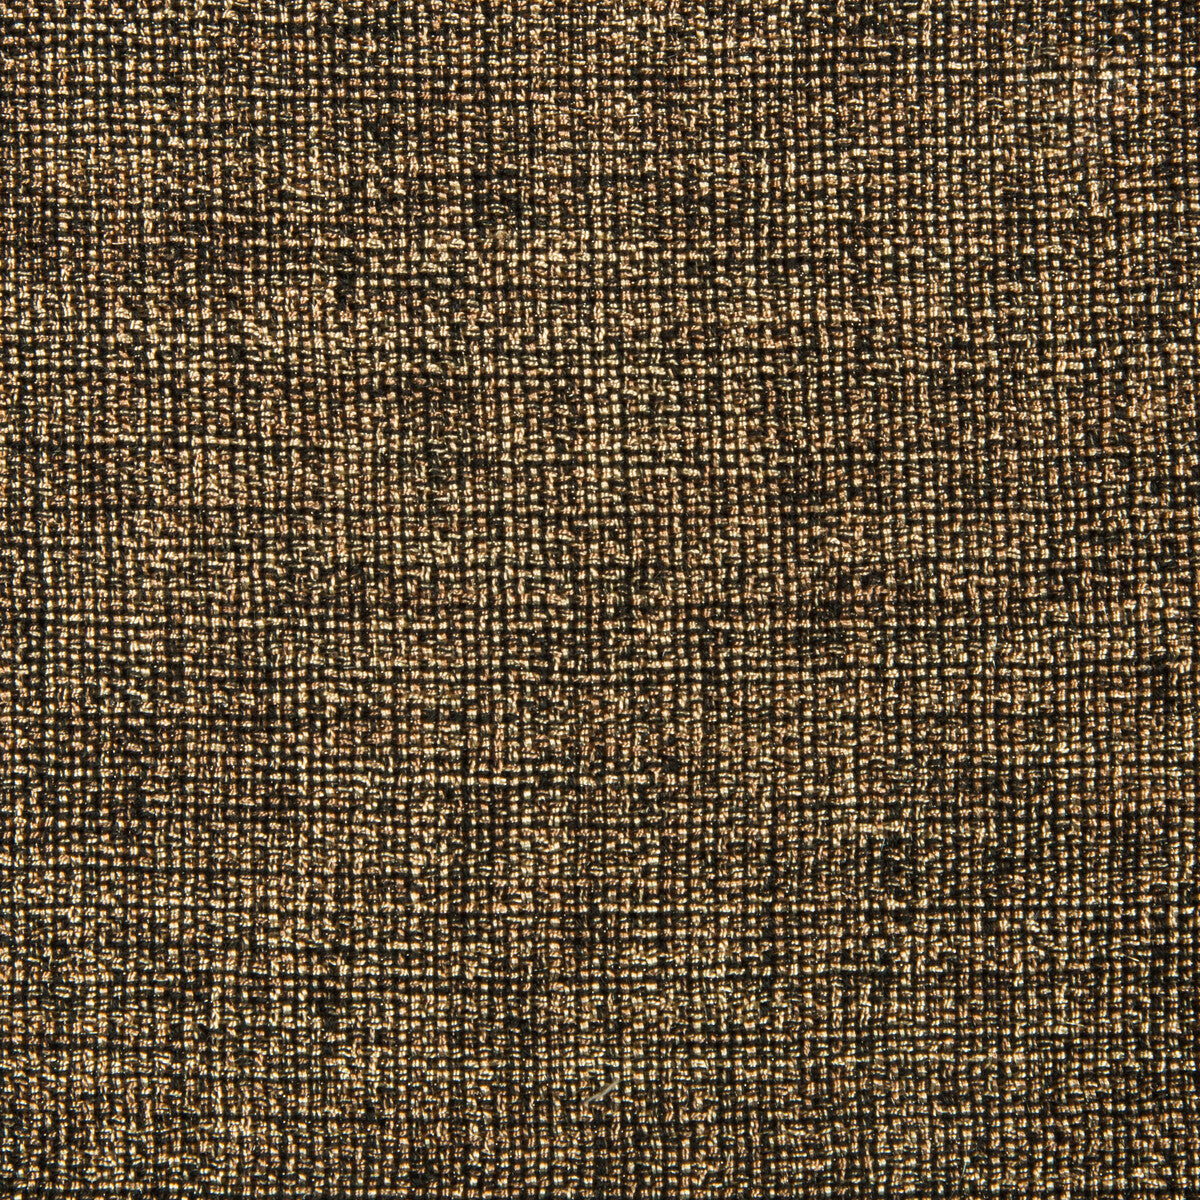 Kravet Contract fabric in 34926-814 color - pattern 34926.814.0 - by Kravet Contract